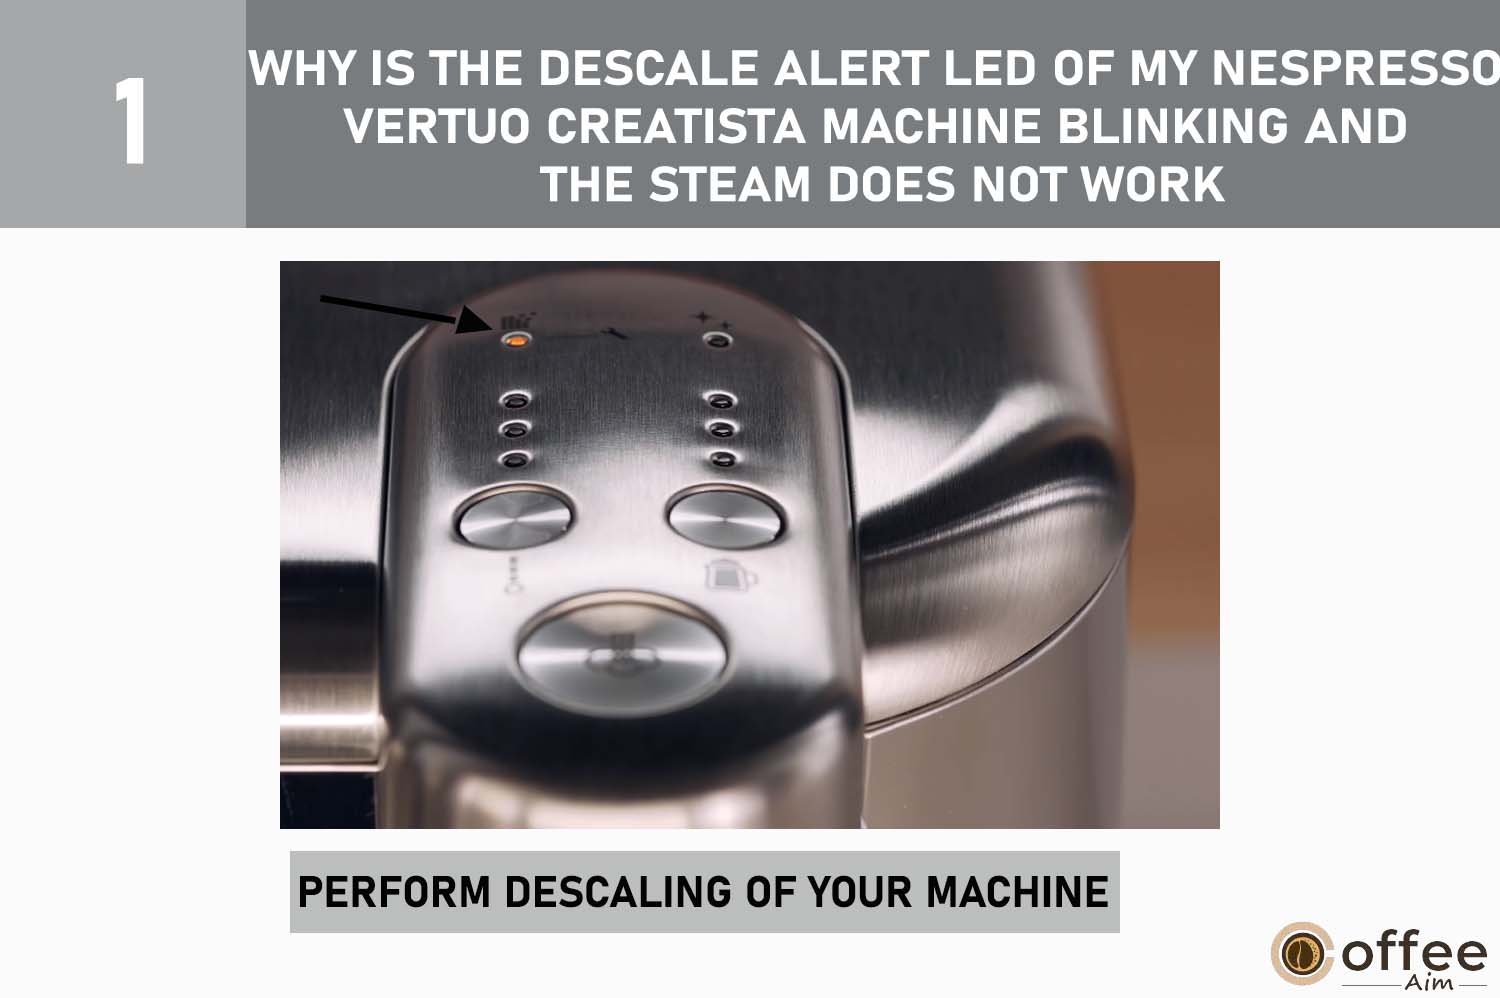 To fix Nespresso Vertuo Creatista issues, descale by following the image guide, ensuring proper maintenance for blinking LED and steam problems.